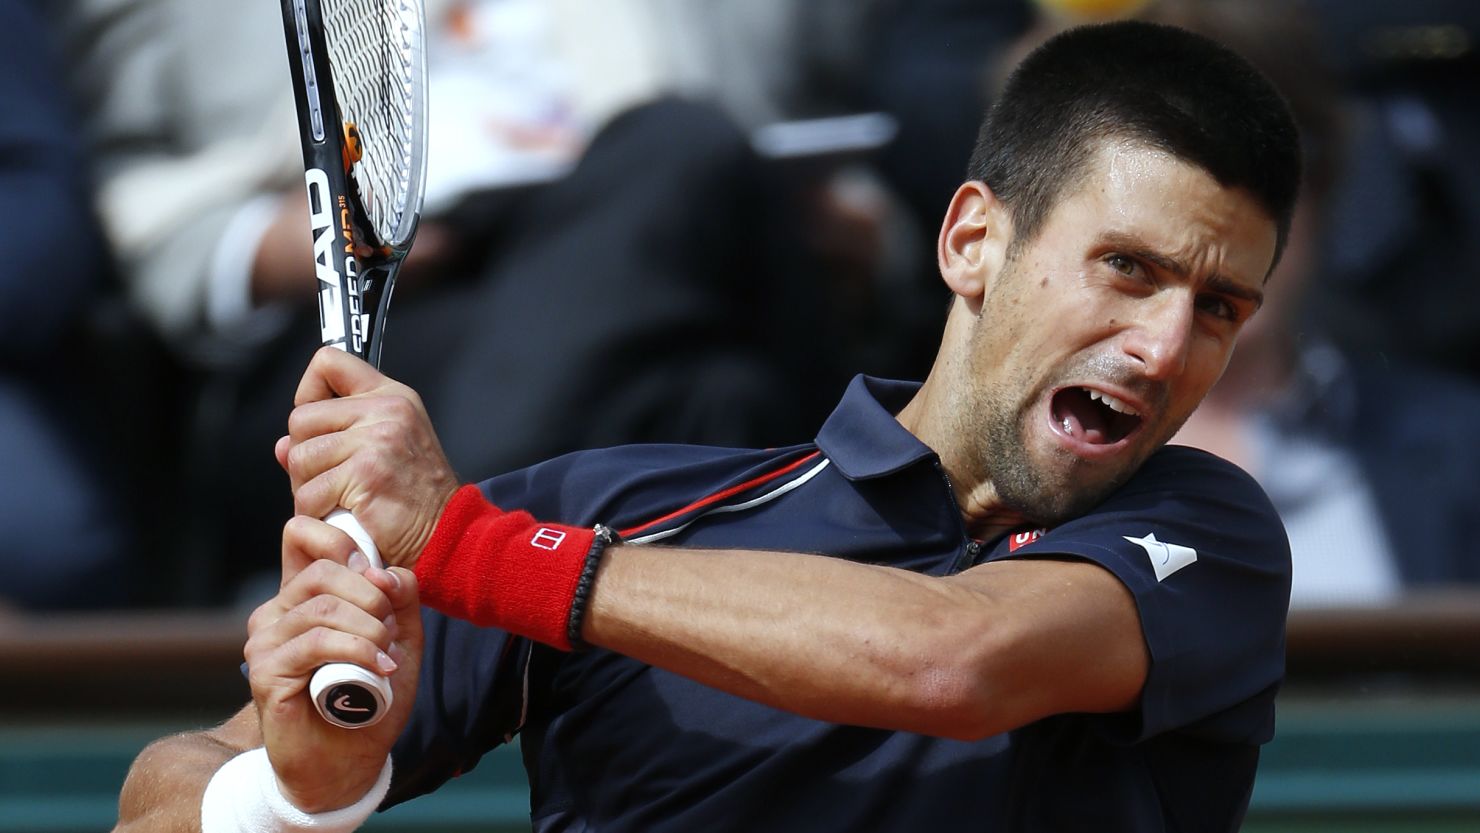 Serbian tennis star Novak Djokovic was relieved after finally overcoming Andreas Seppi at Roland Garros on Sunday.